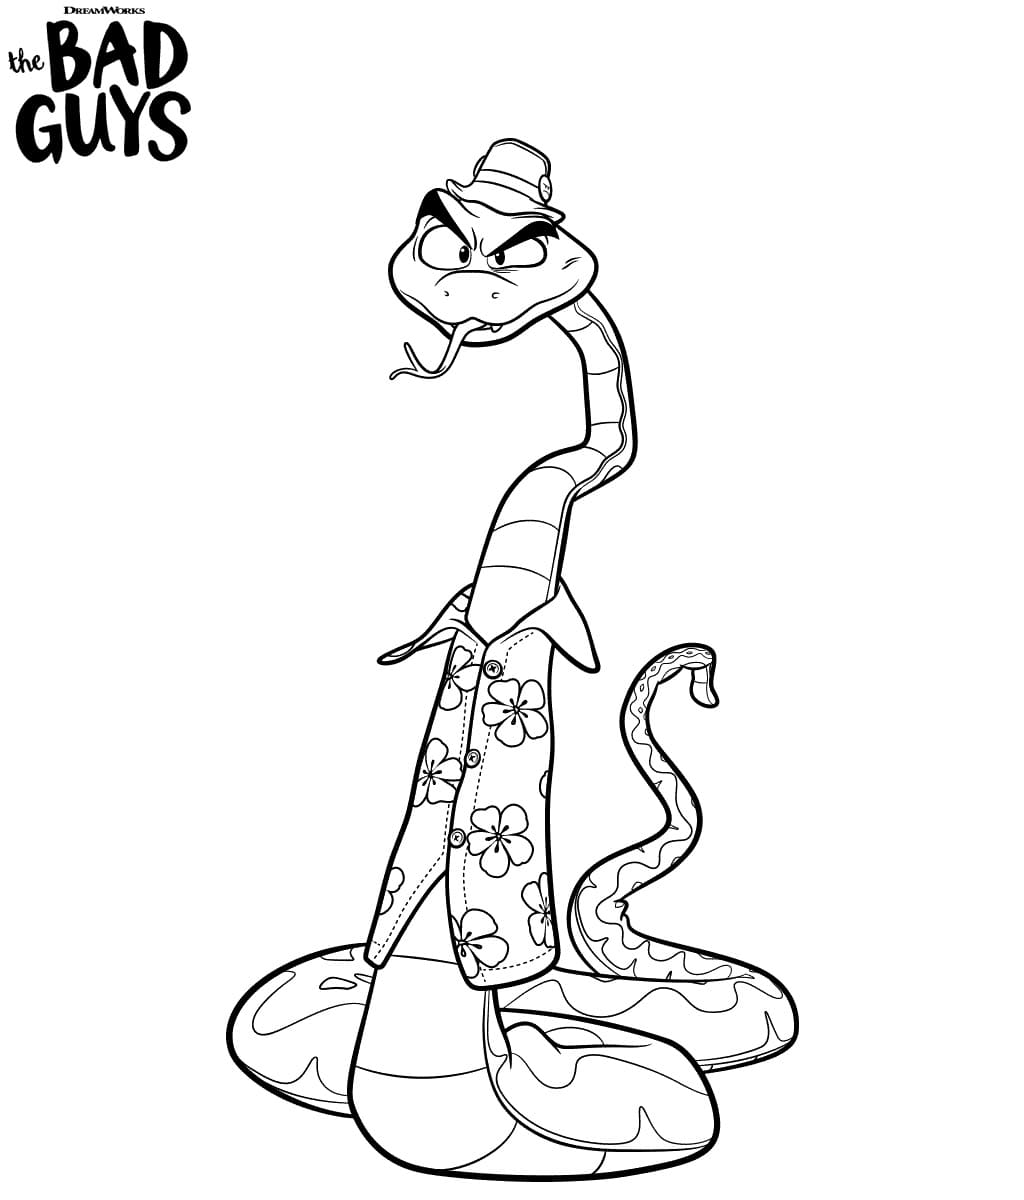 Mr. Snake from The Bad Guys